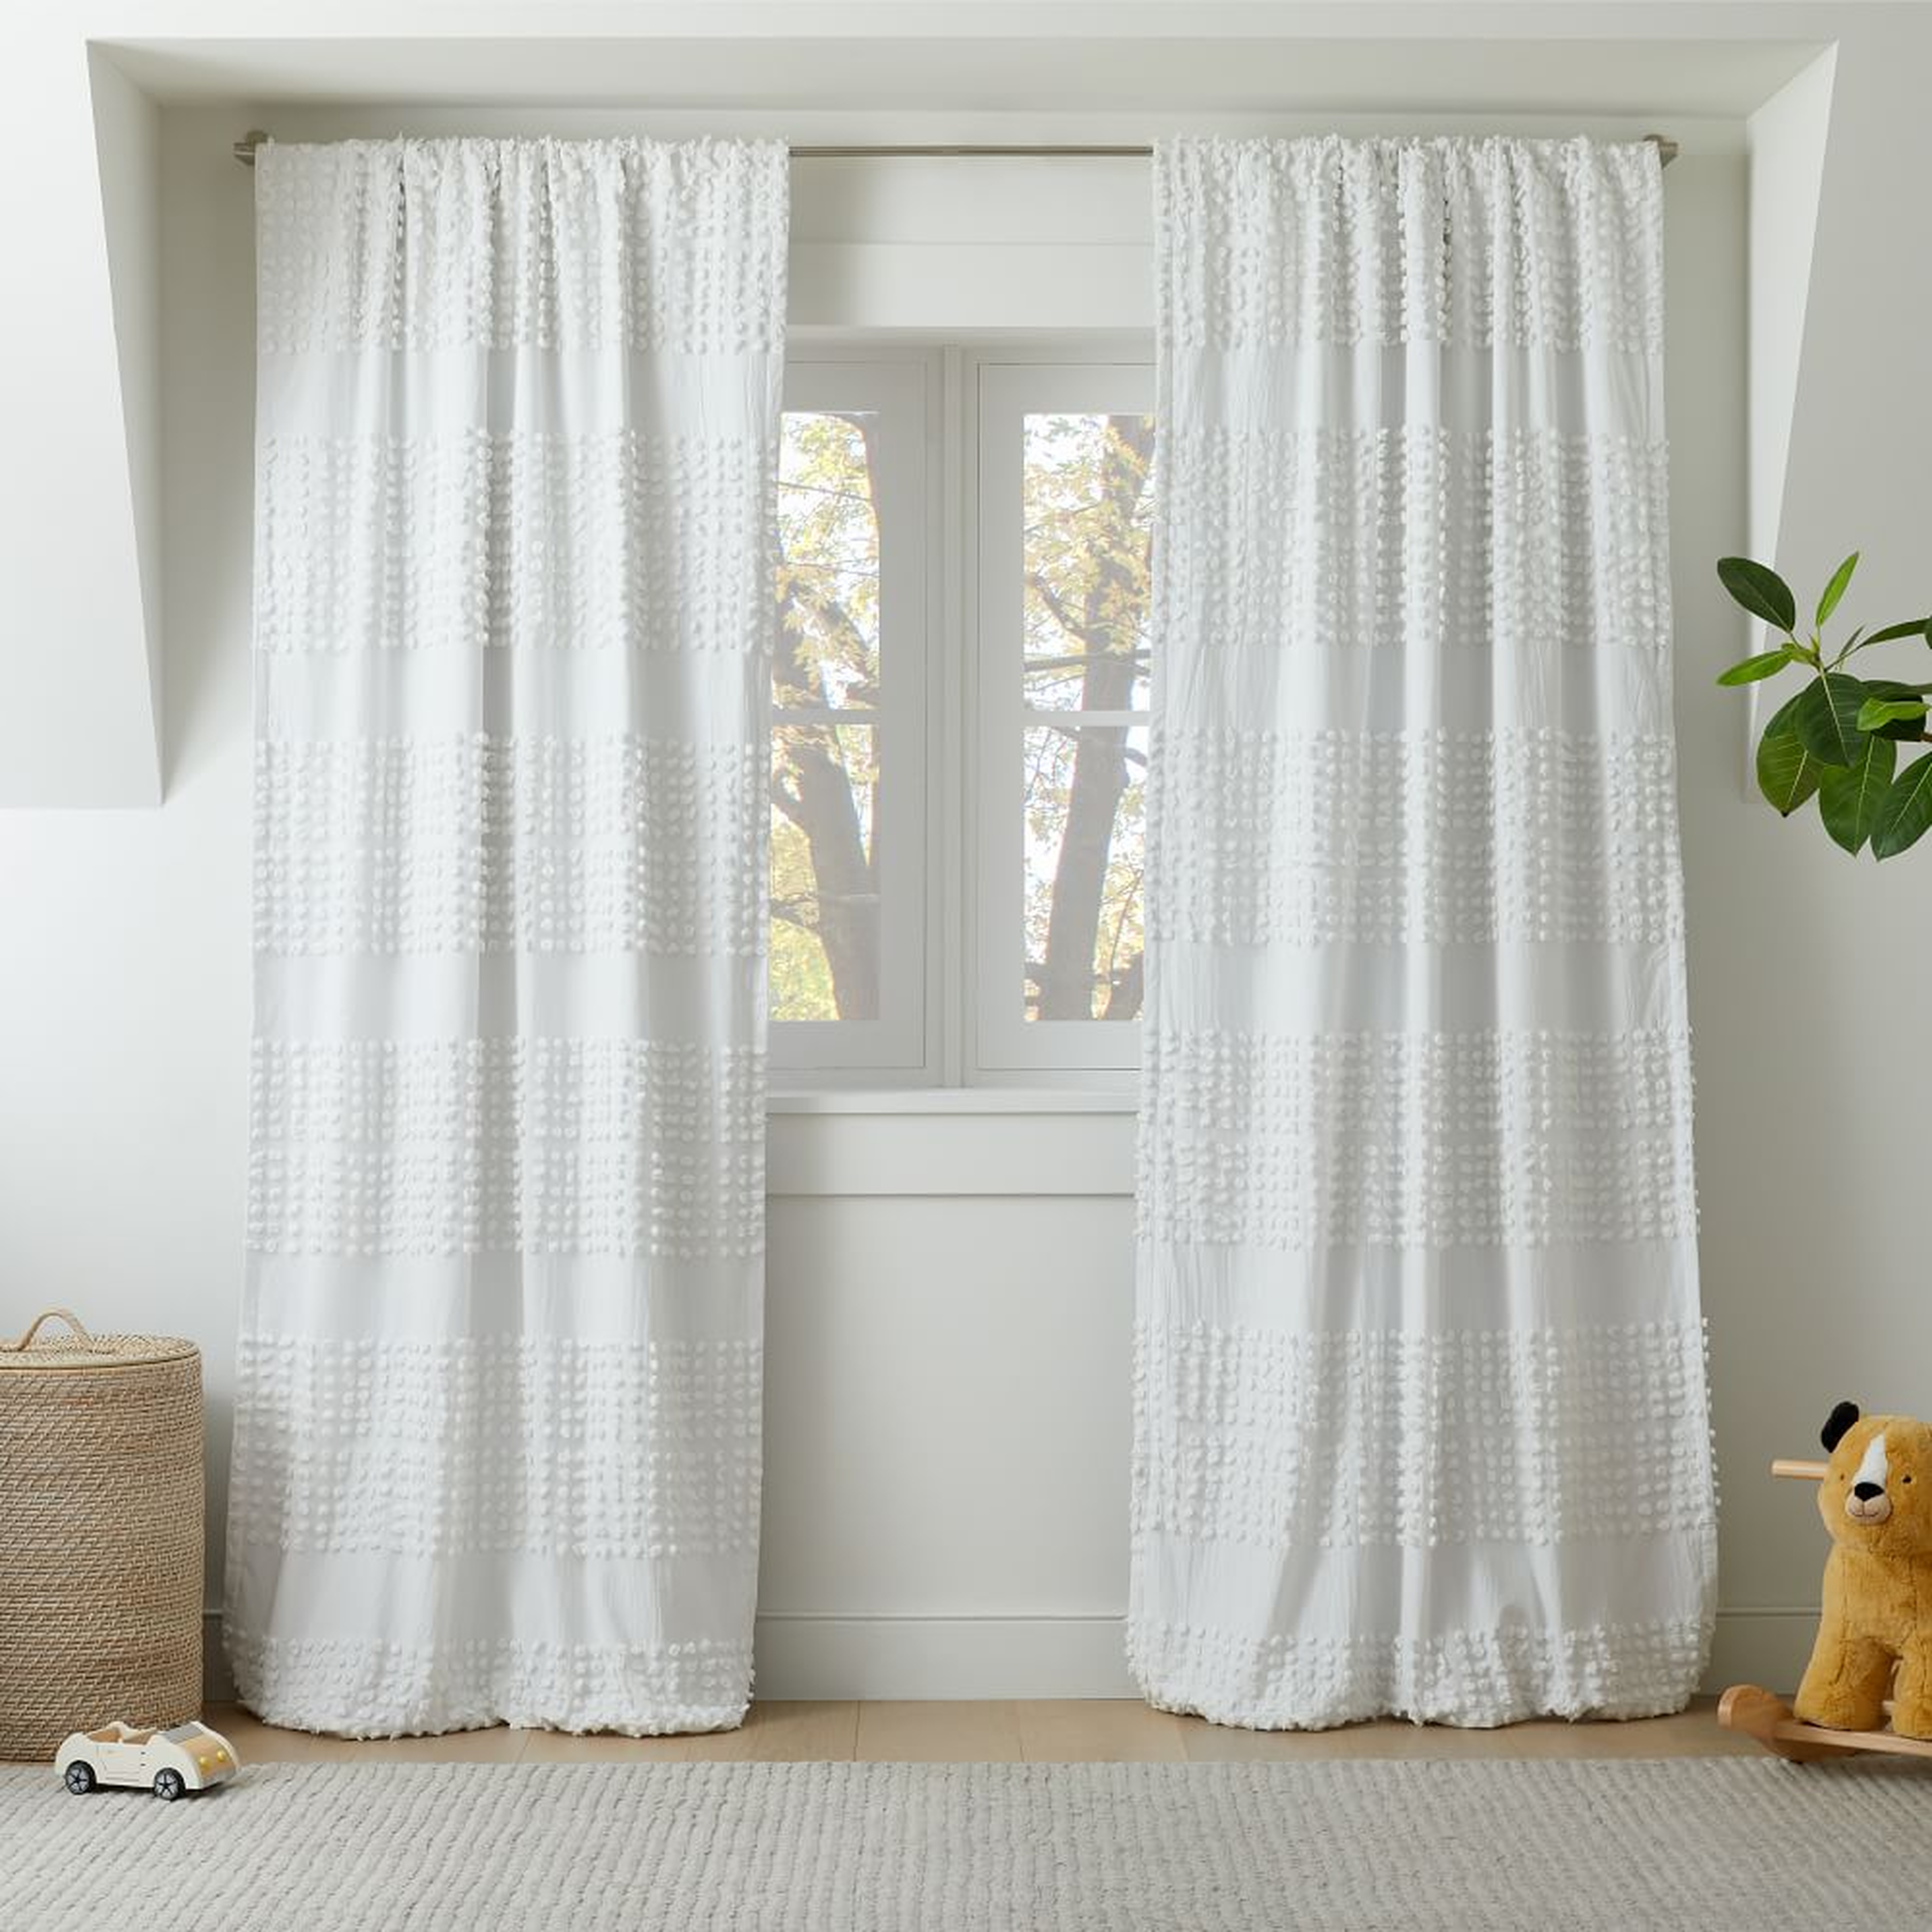 Candlewick Blackout Curtain Panel, 48X96, White, WE Kids - West Elm